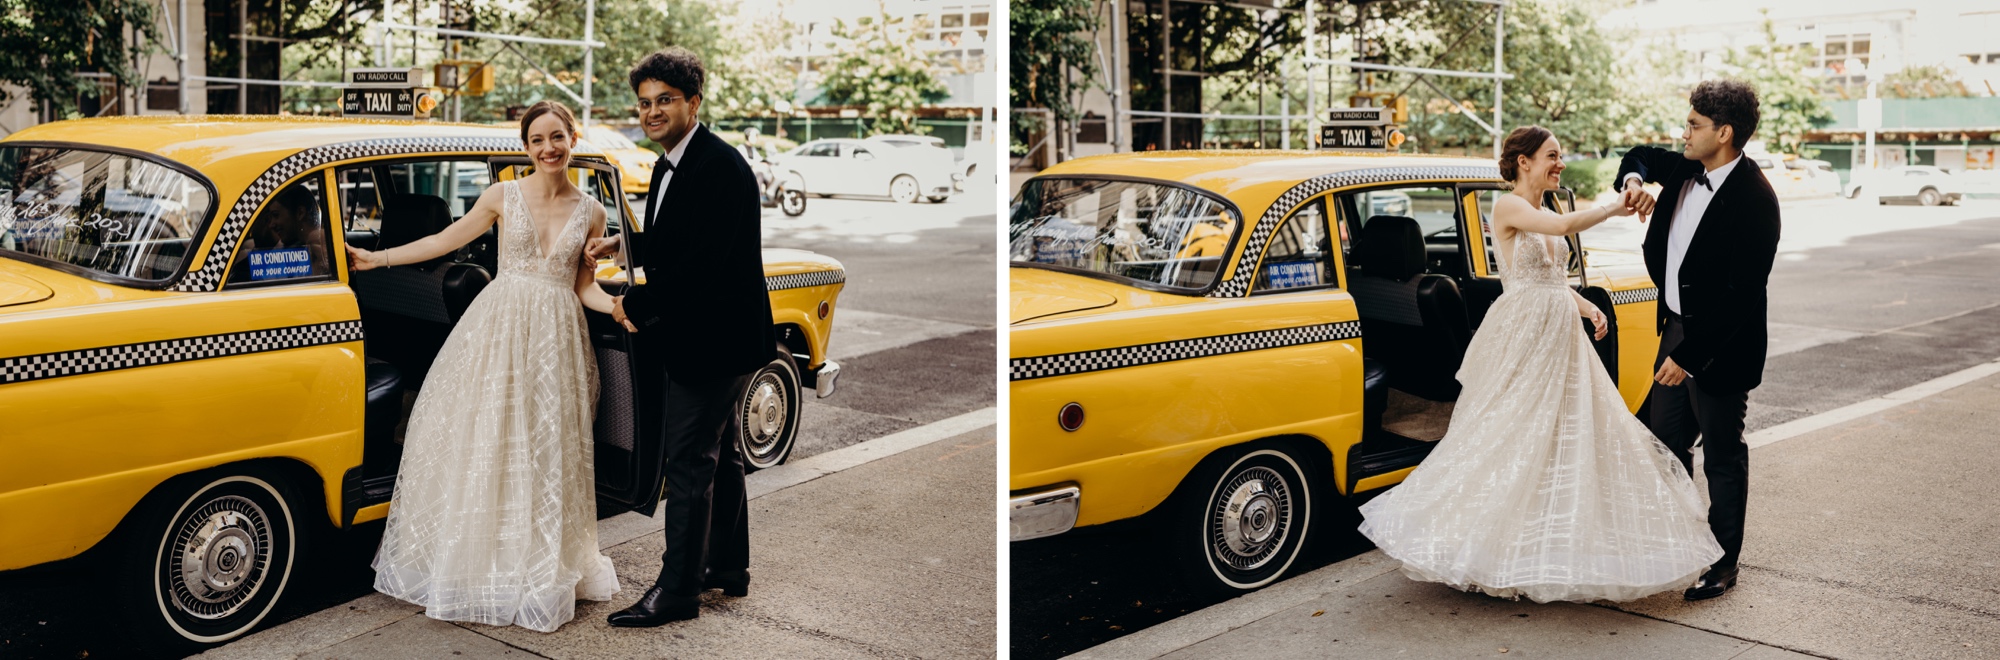 portrait of a bride and groom dancing in front of a vintage yellow cab in new york city